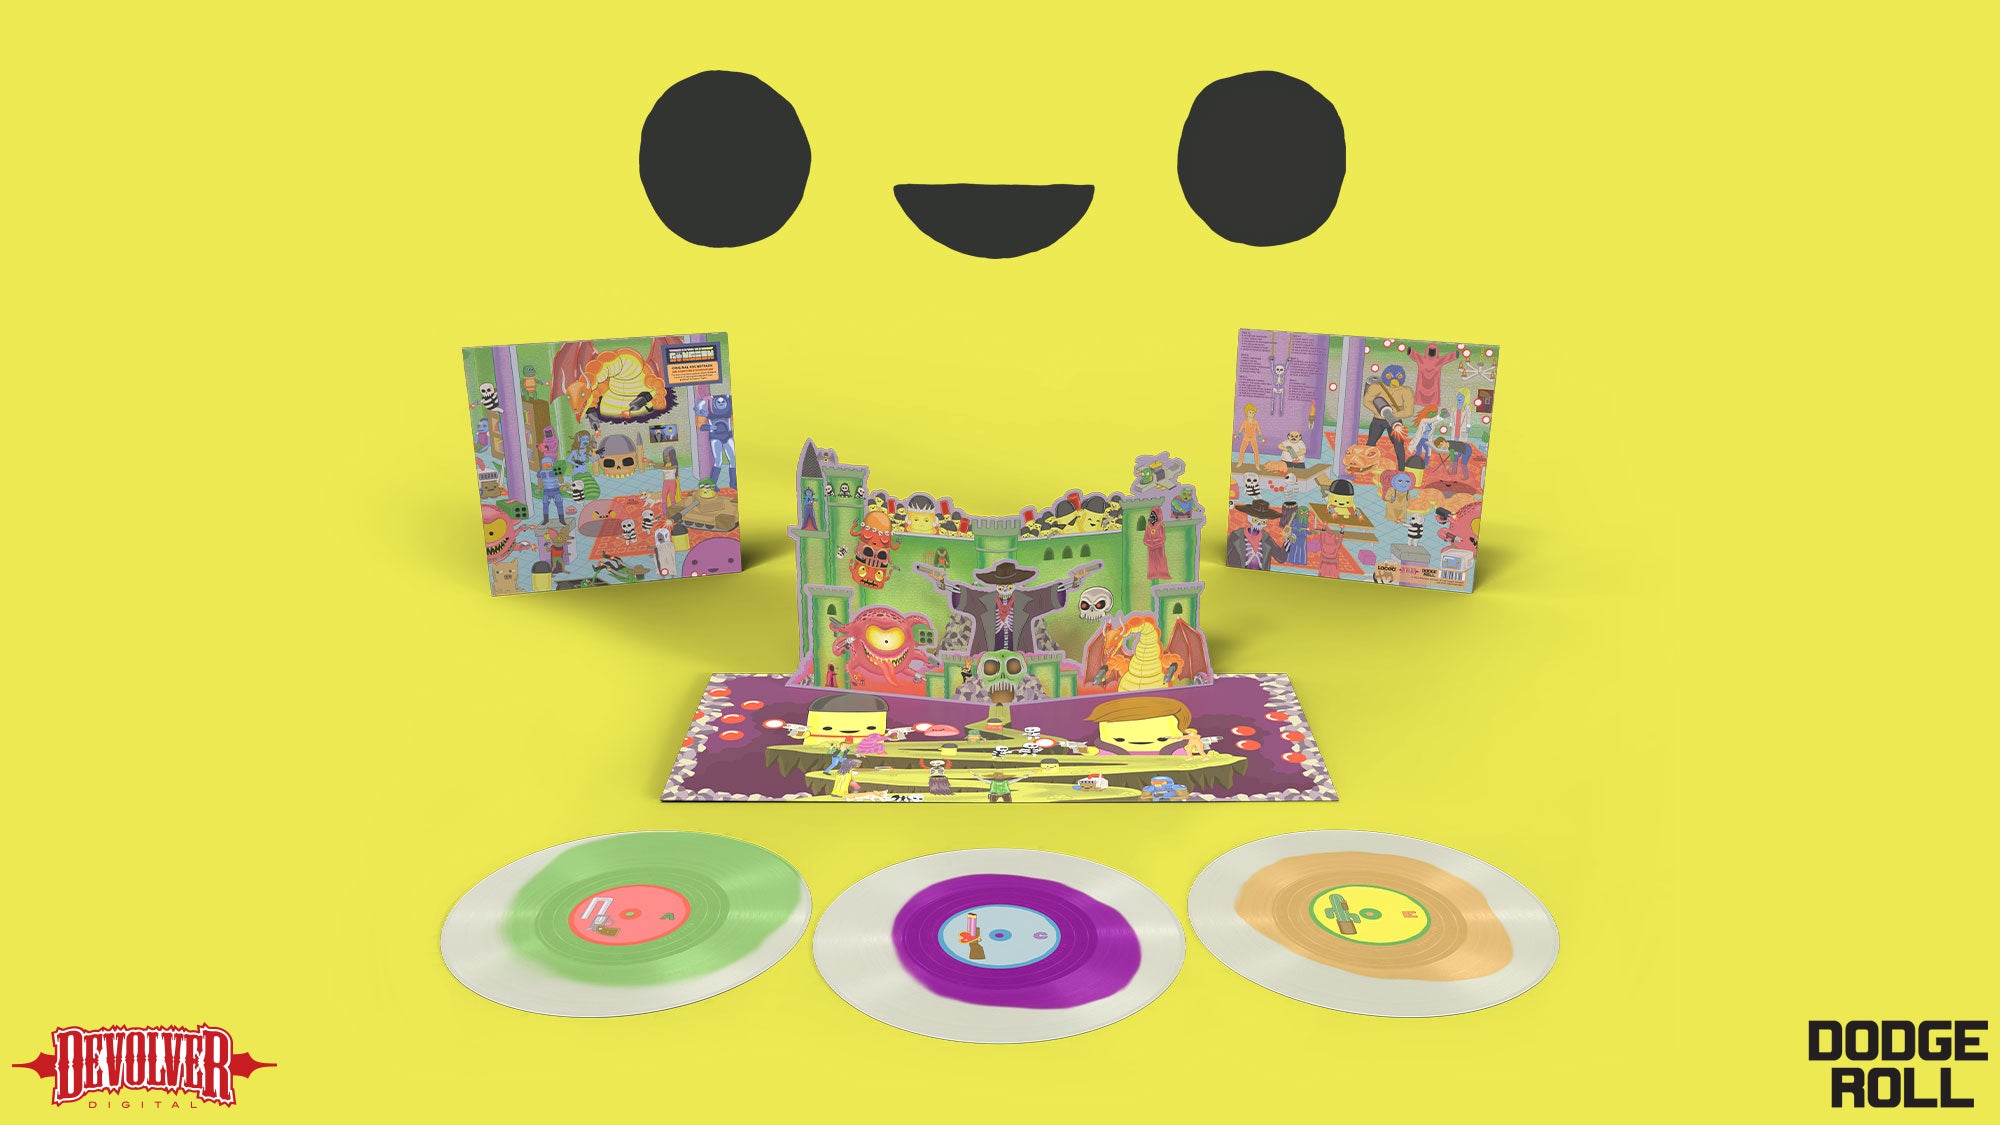 The Enter and Exit the Gungeon Anniversary Limited Edition pop-up triple LP vinyl